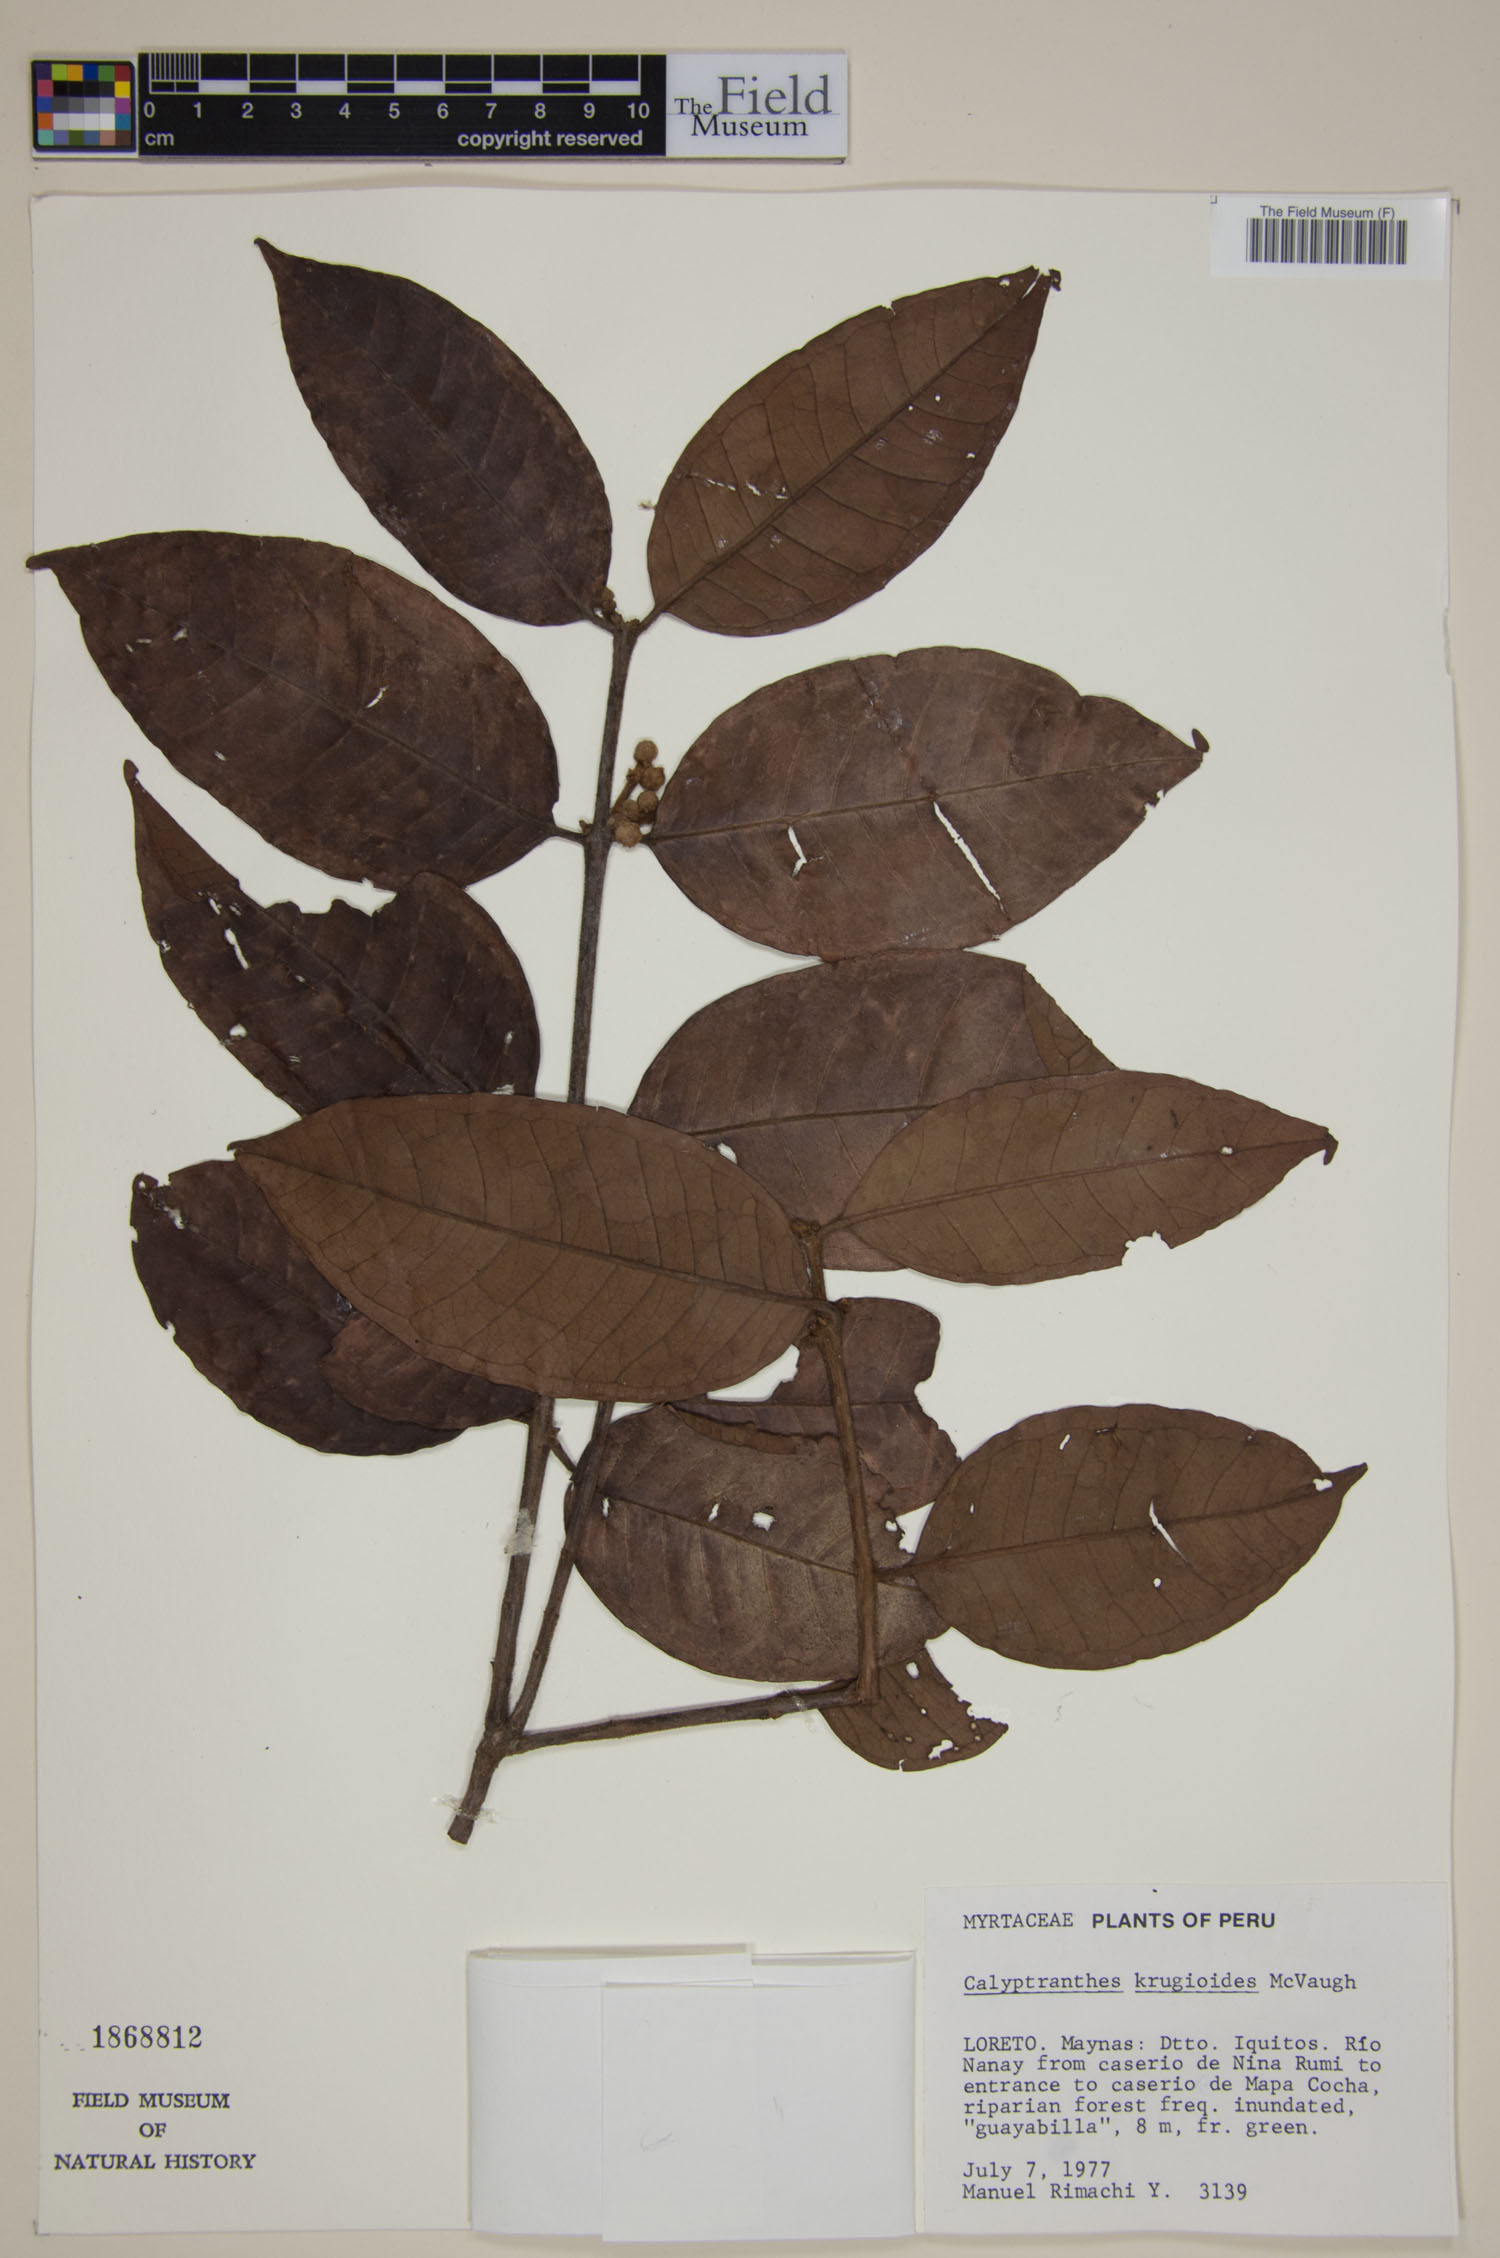 Calyptranthes krugioides image